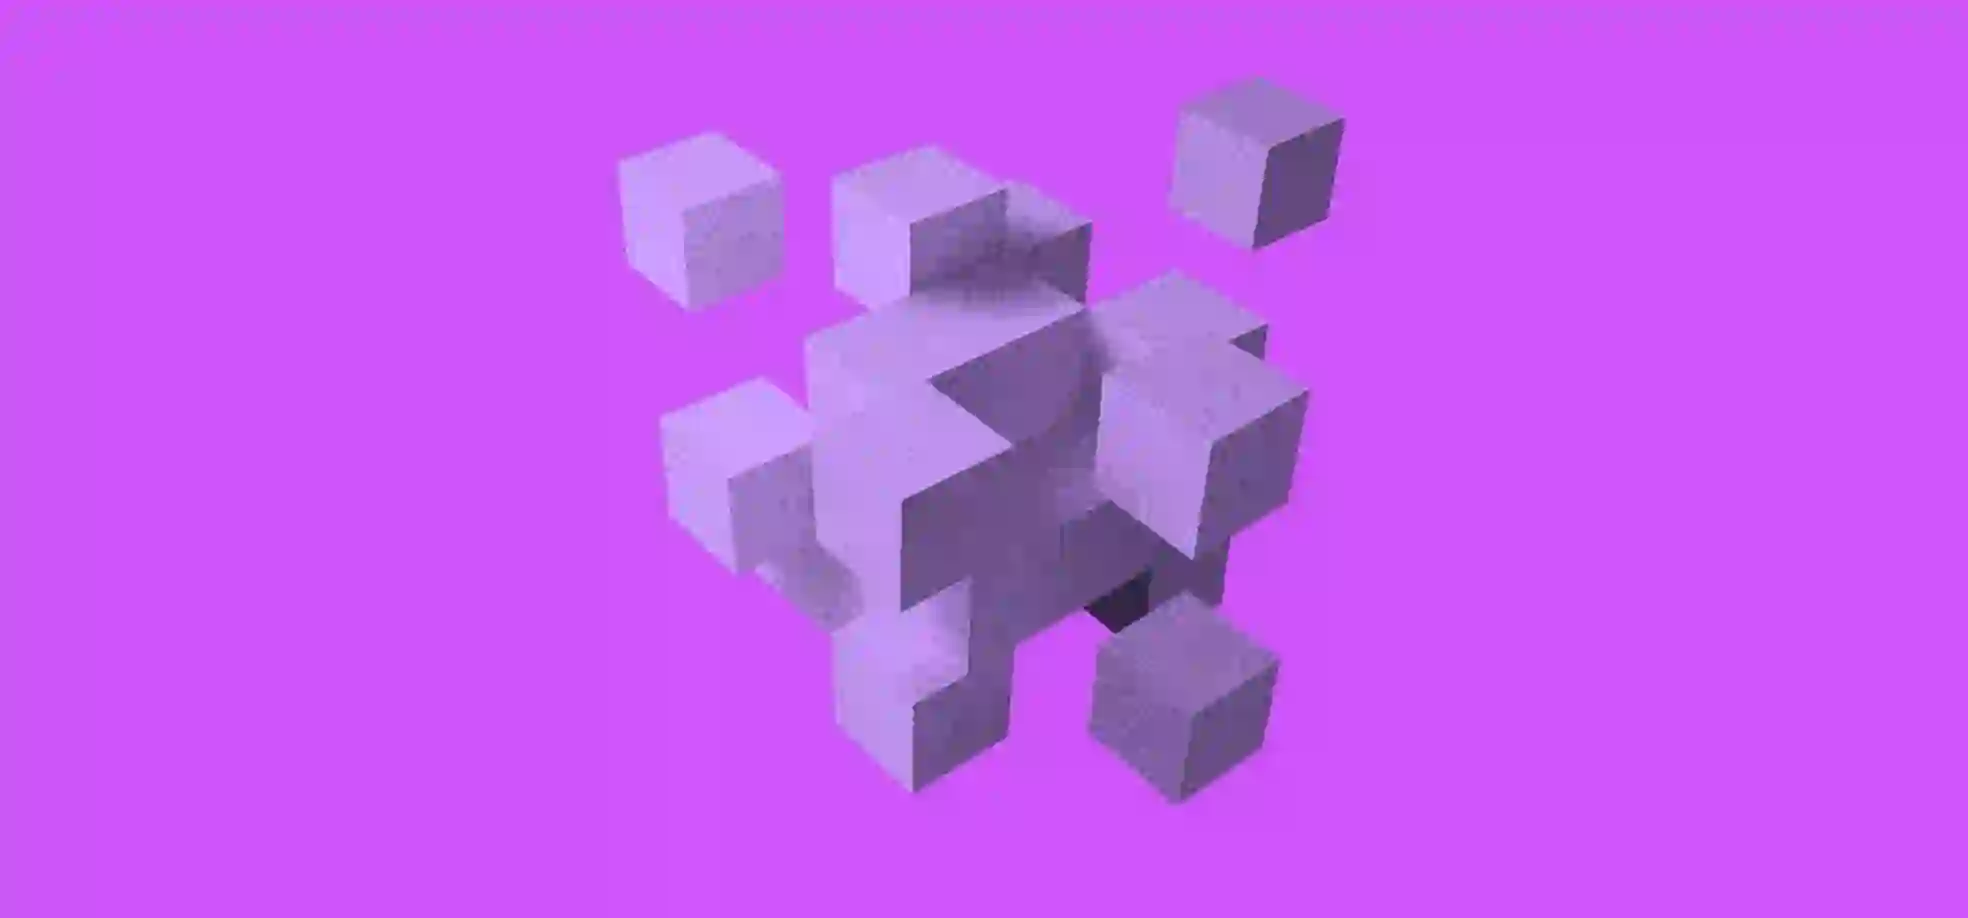 cube illustrations on a purple background